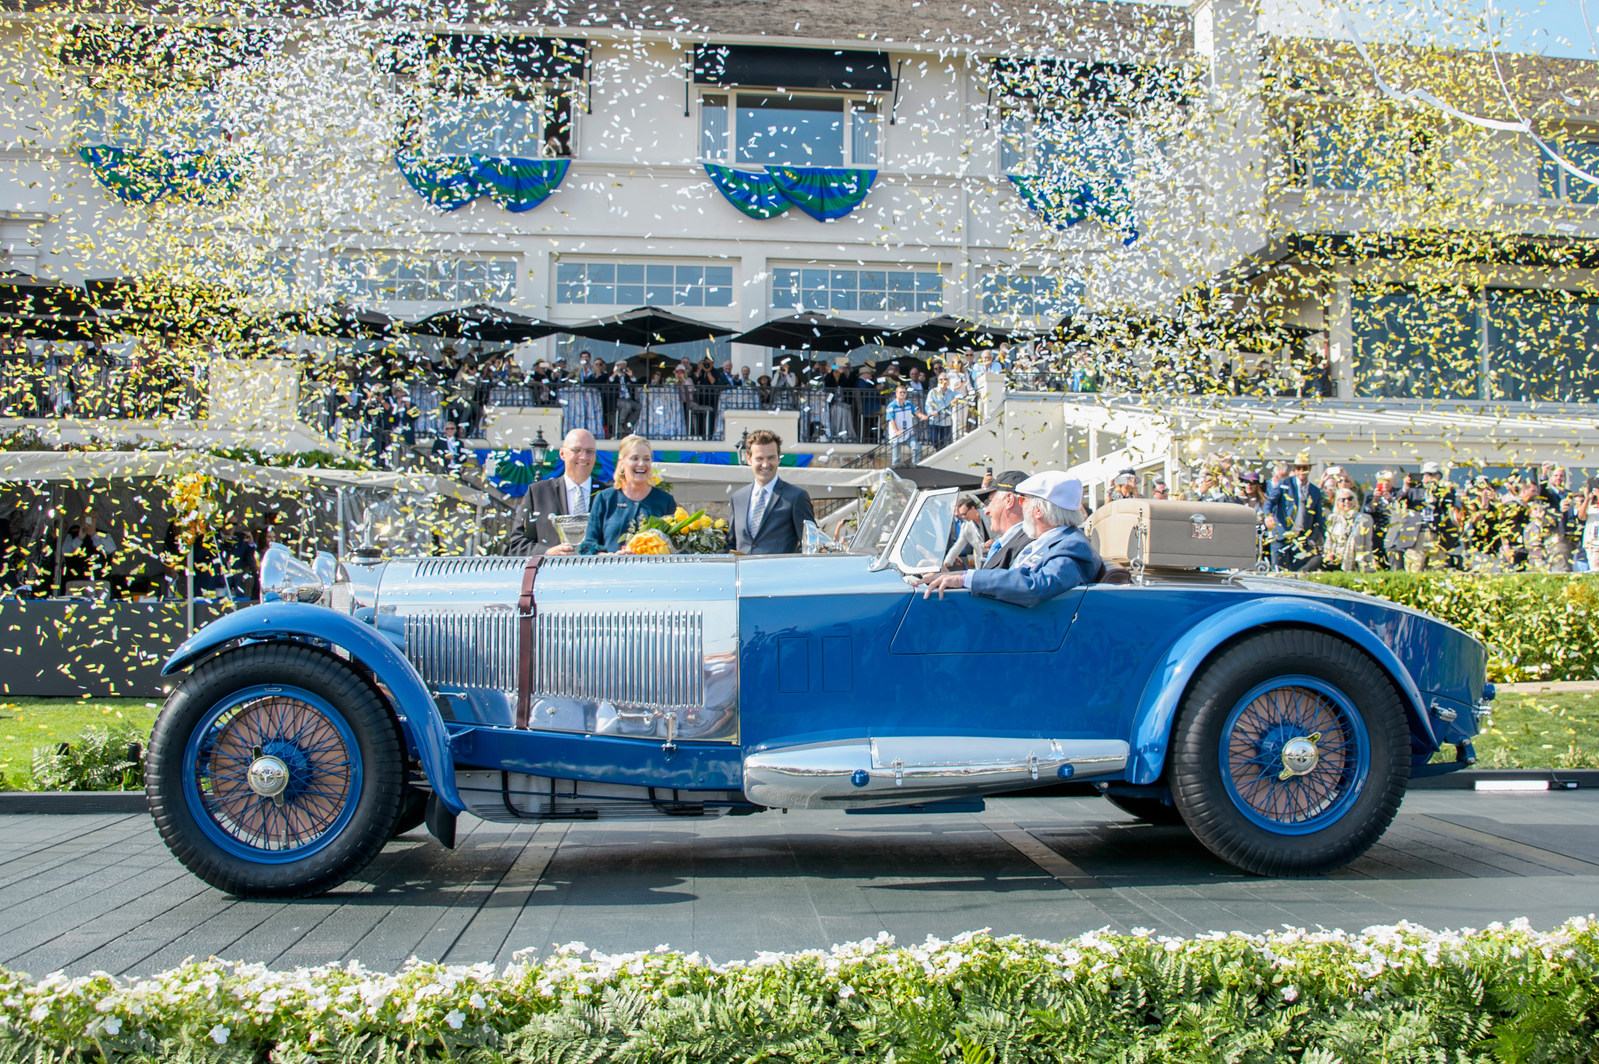 This 1929 Mercedes-Benz S Barker Tourer was named Best of Show at the 2017 Pebble Beach Concours d'Elegance. Pictured from left to right are Pebble Beach Company CEO William L. Perocchi, Concours Chairman Sandra Button, Emcee Derek Hill, restorer Stephen Babinsky, and owner Bruce R. McCaw. (Copyright © Kimball Studios / Courtesy of Pebble Beach Concours d'Elegance) (PRNewsfoto/Pebble Beach Concours d'Elegance)